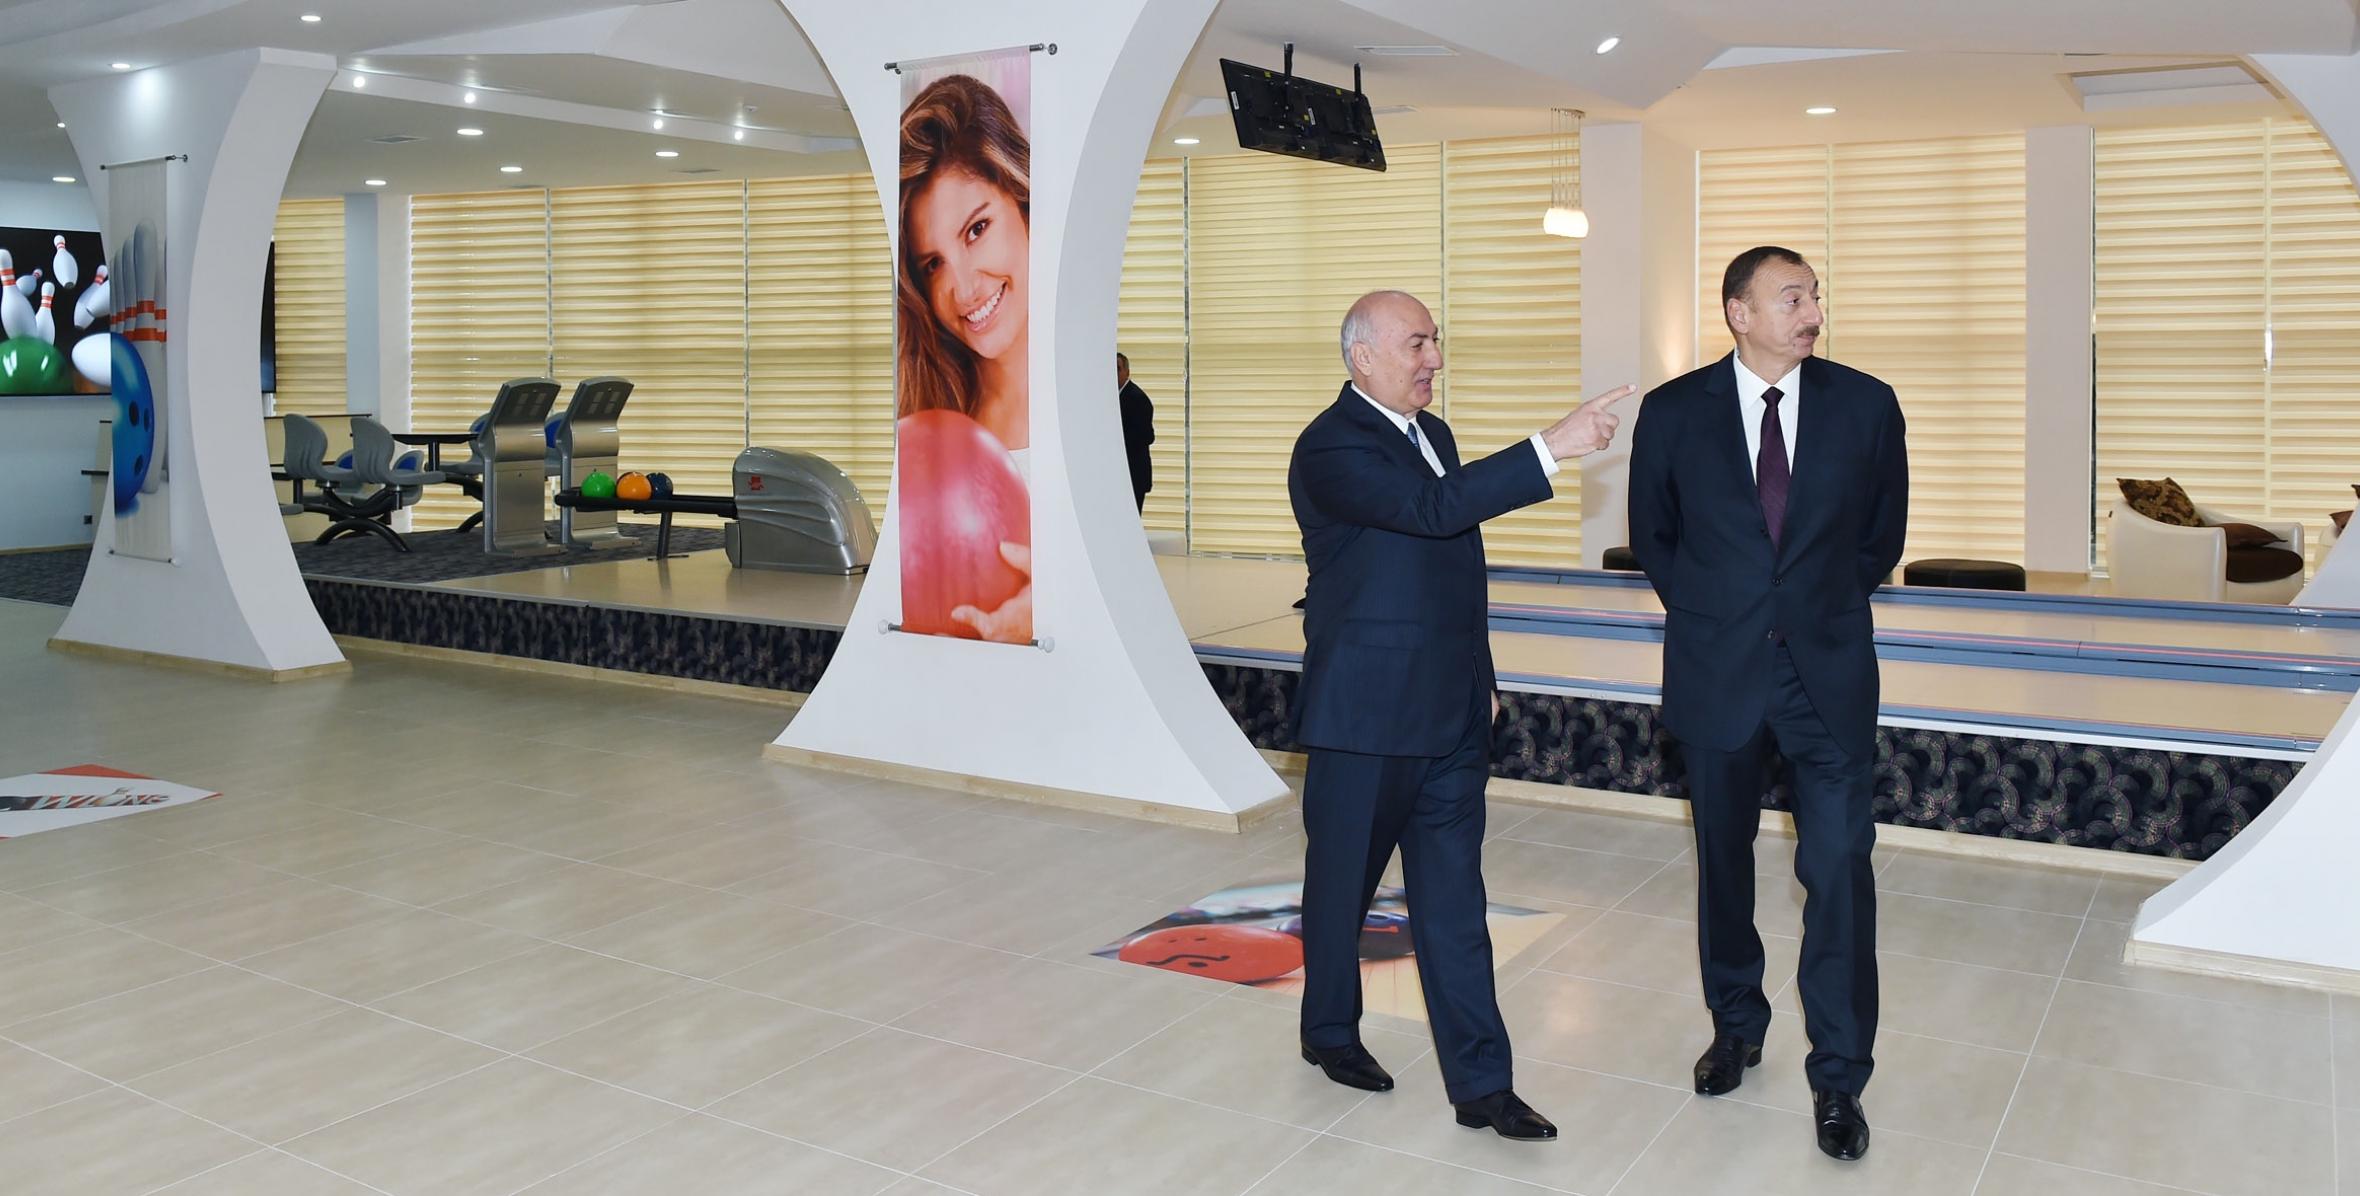 Ilham Aliyev attended the opening of “Park Absheron” entertainment center in Khirdalan